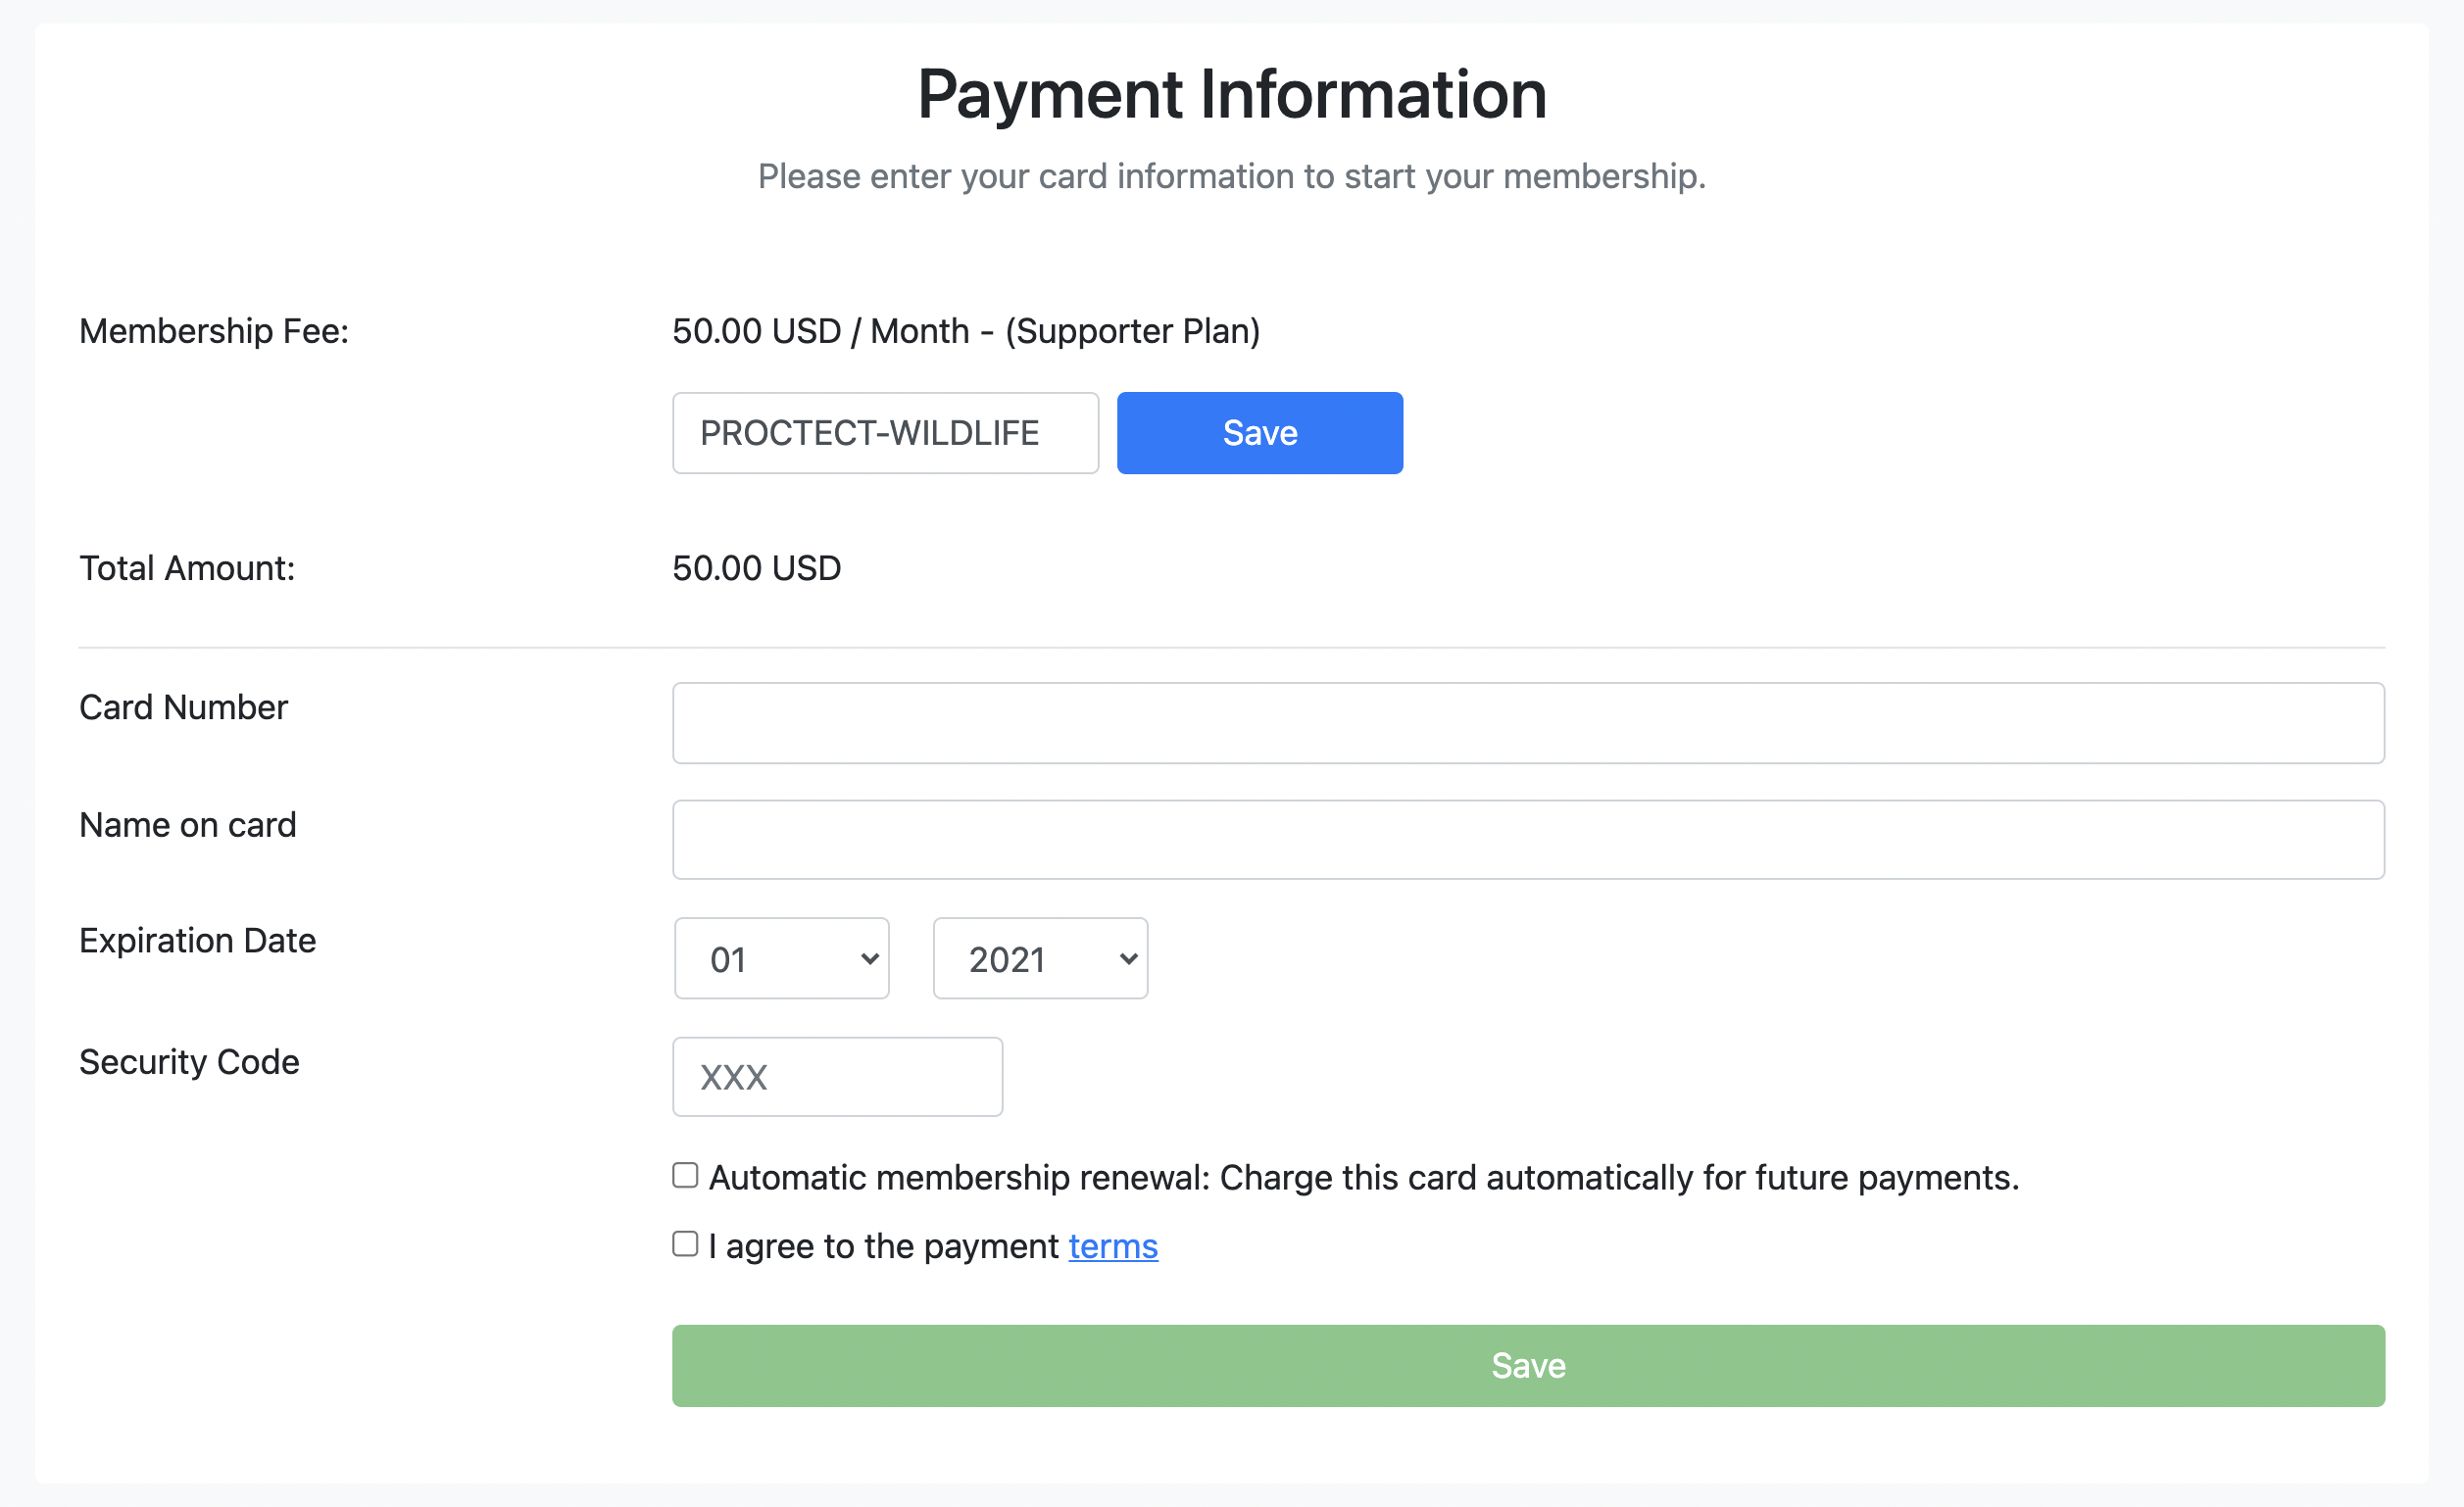 Payment Information screen